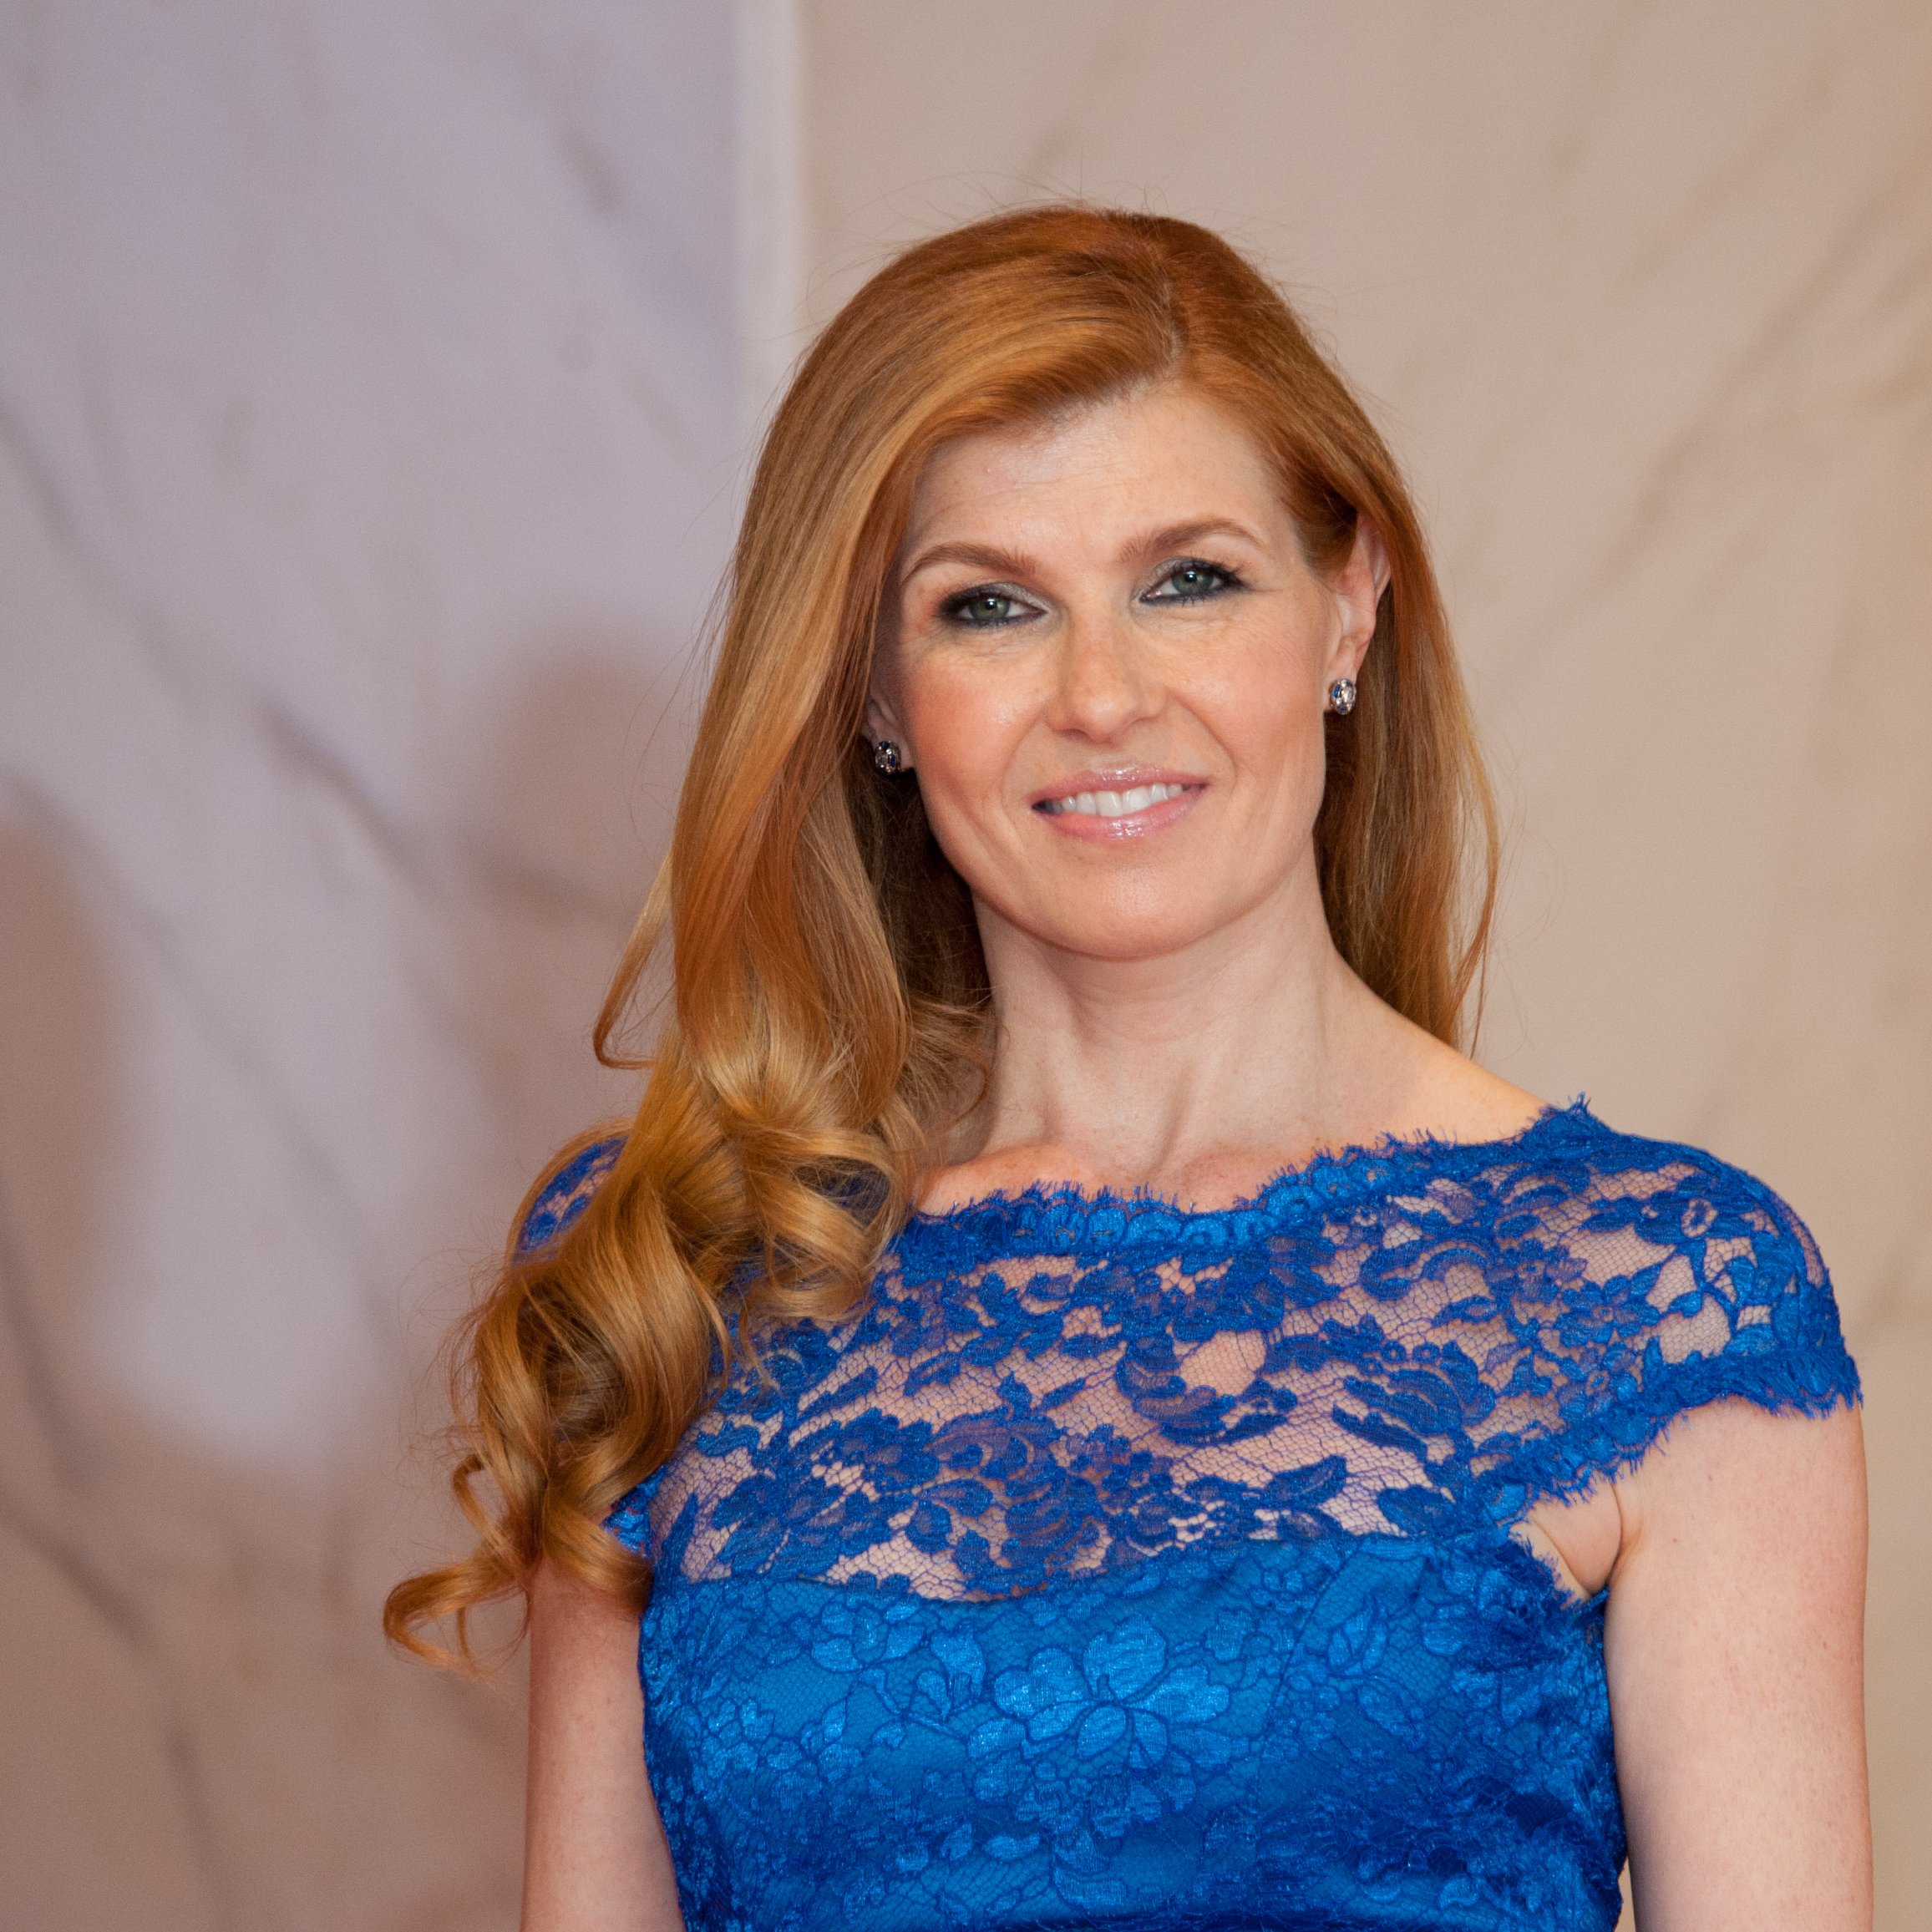 Connie Britton arrives at the White House Correspondents Dinner on April 27, 2013, in Washington, DC. | Source: Shutterstock.